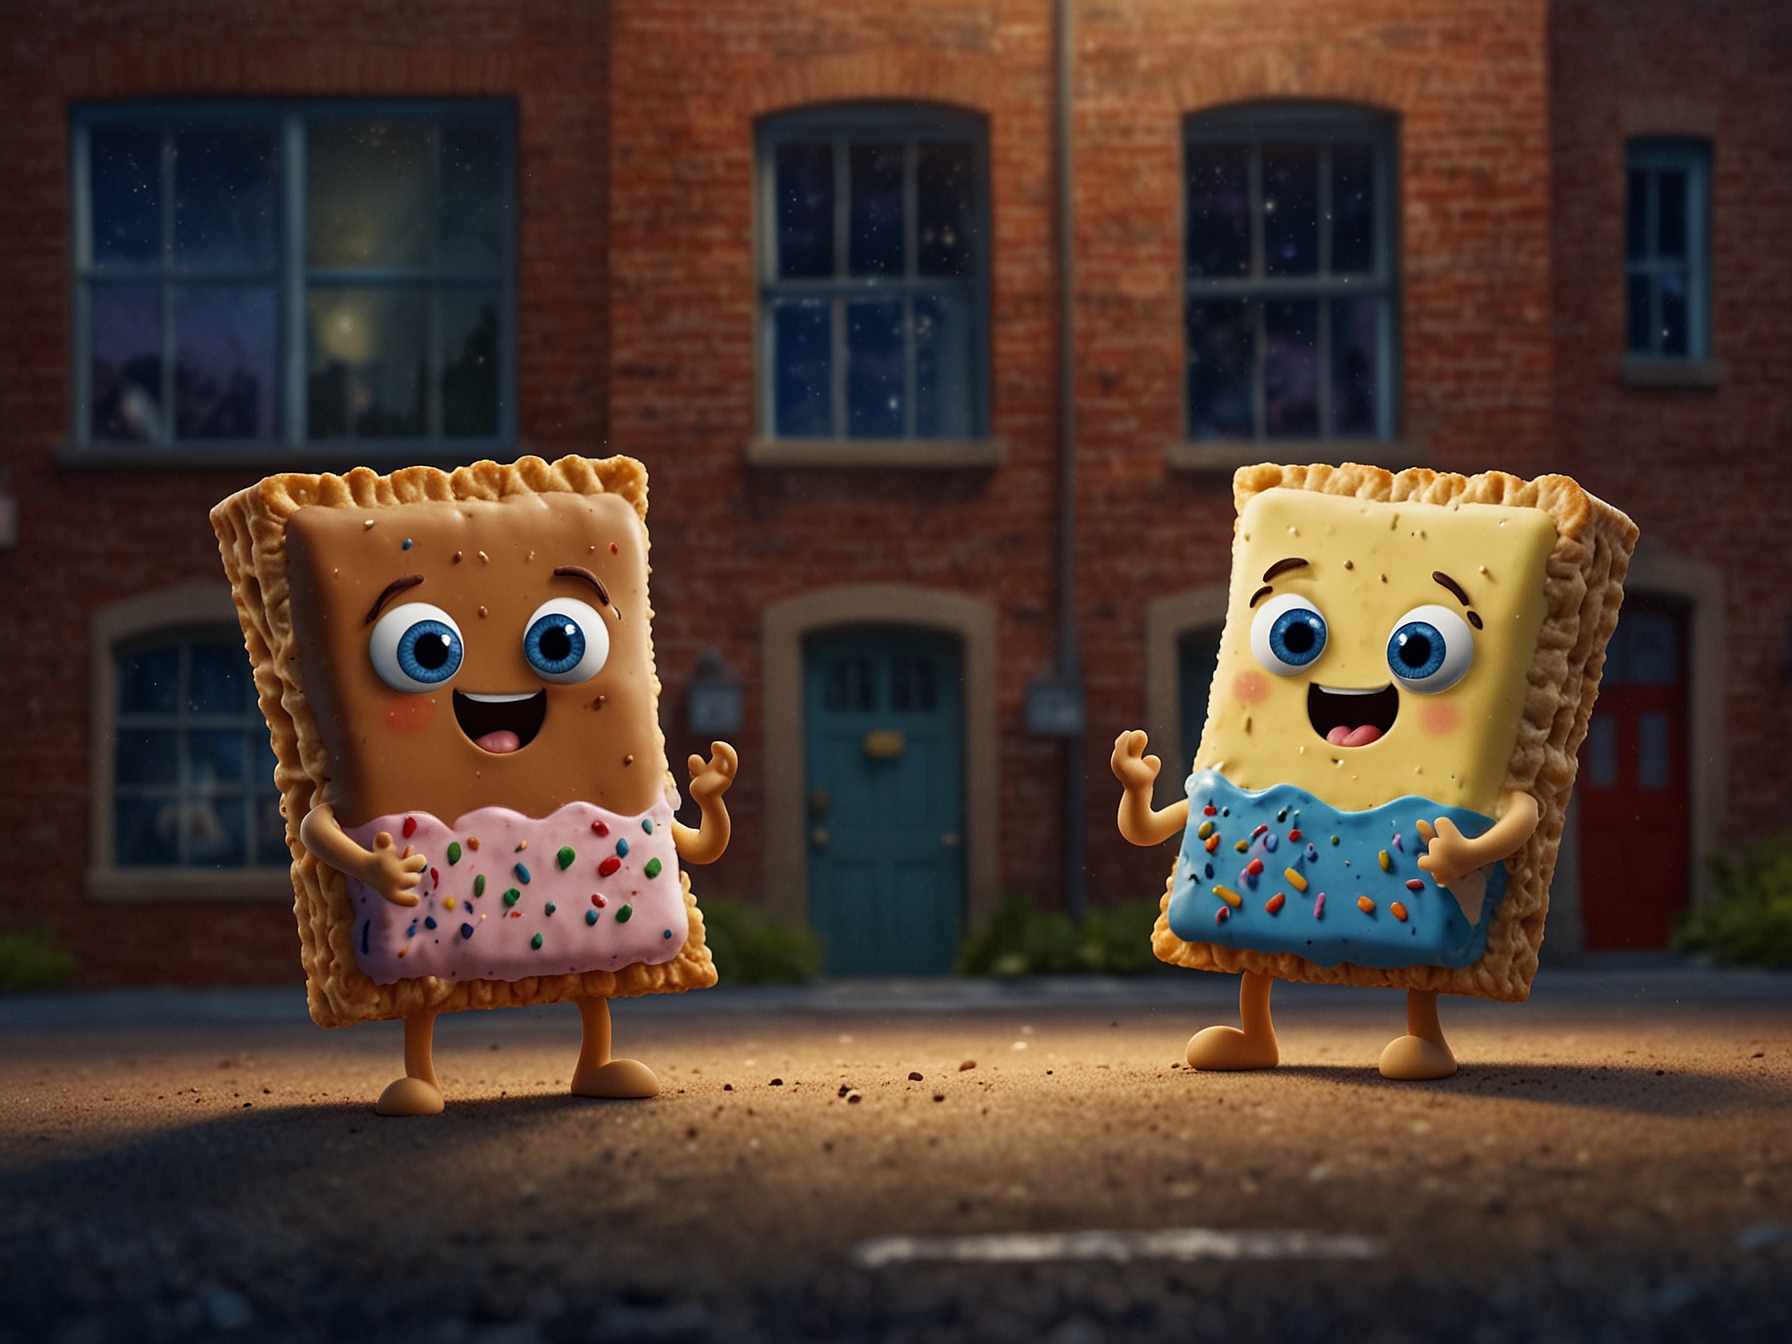 A visually engaging still from 'Unfrosted,' showcasing animated Pop-Tarts in a whimsical scenario, highlighting the quirky and charming atmosphere of the comedy.